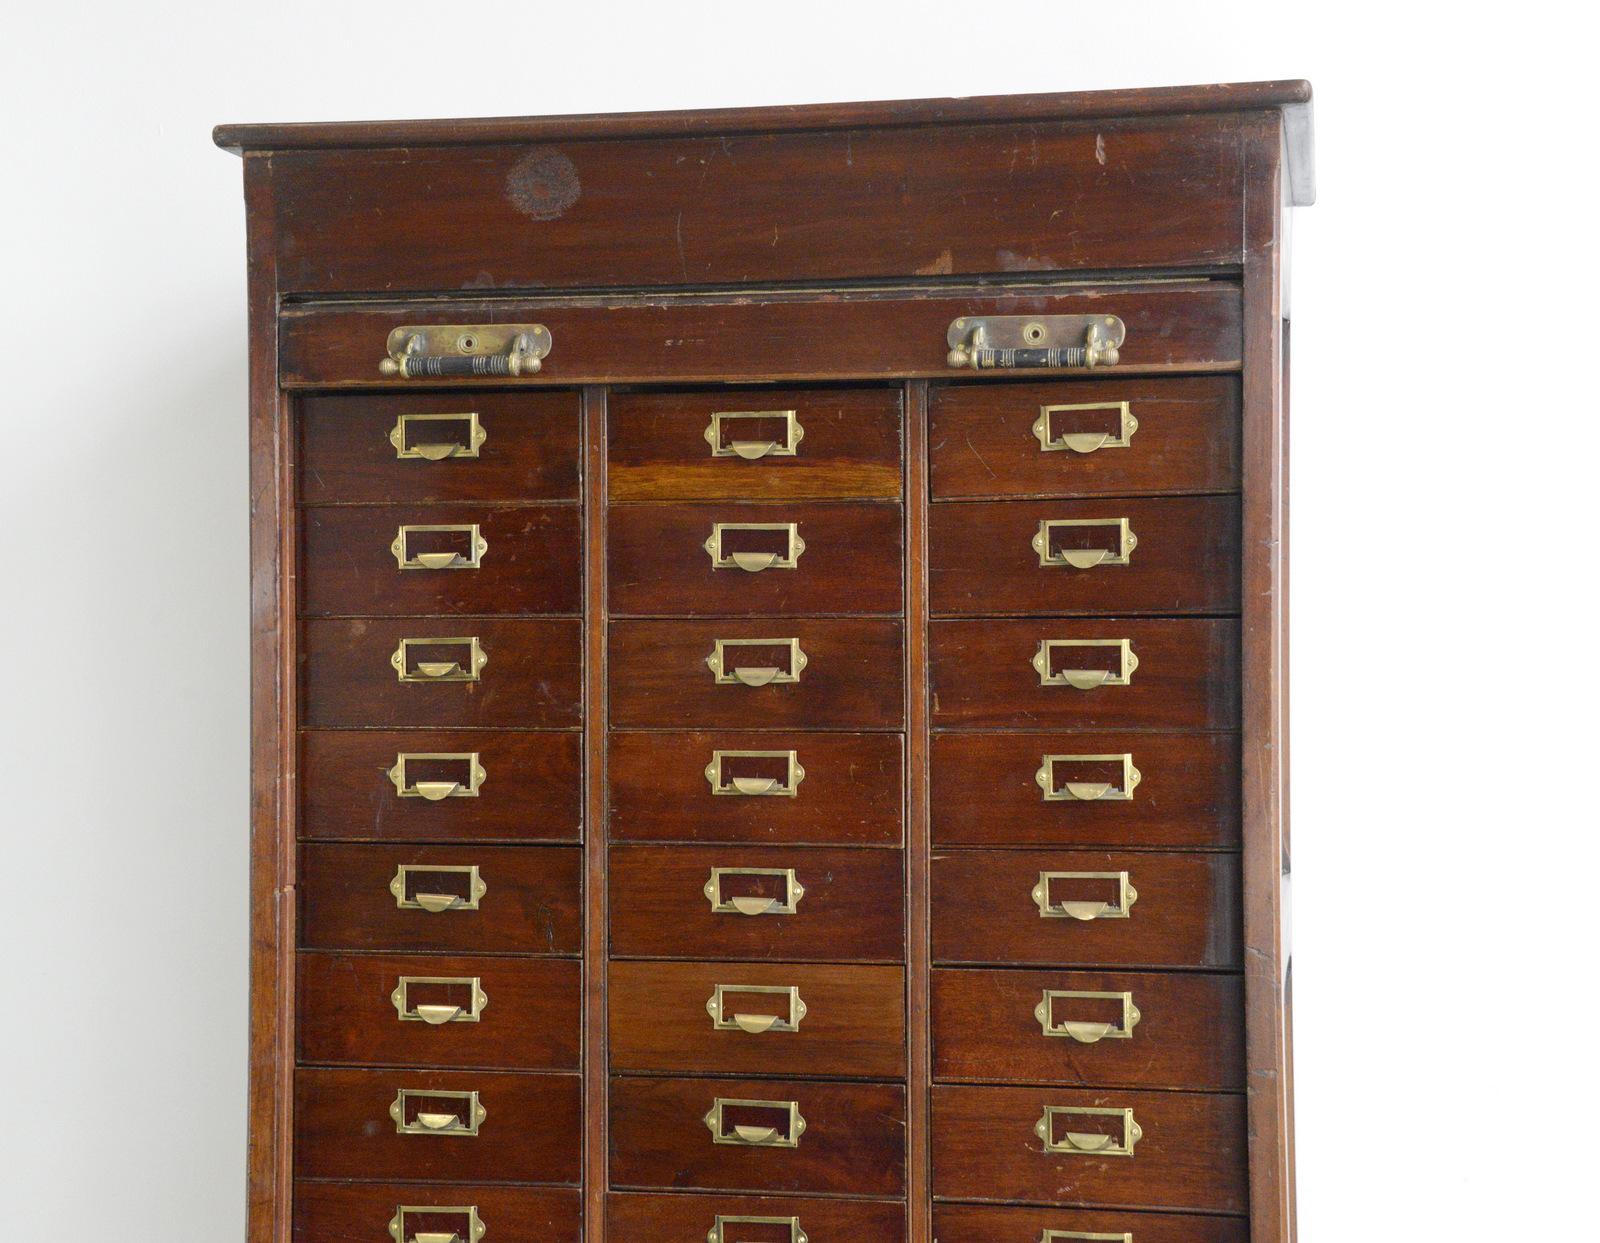 Early 20th century mahogany solicitors drawers

- Mahogany drawers
- Panelled sides and back
- Original brass pulls
- Original sprung documents holder in the drawers
- English ~ 1900
- 91cm wide x 57cm deep x 208cm tall
- The 4 large drawers